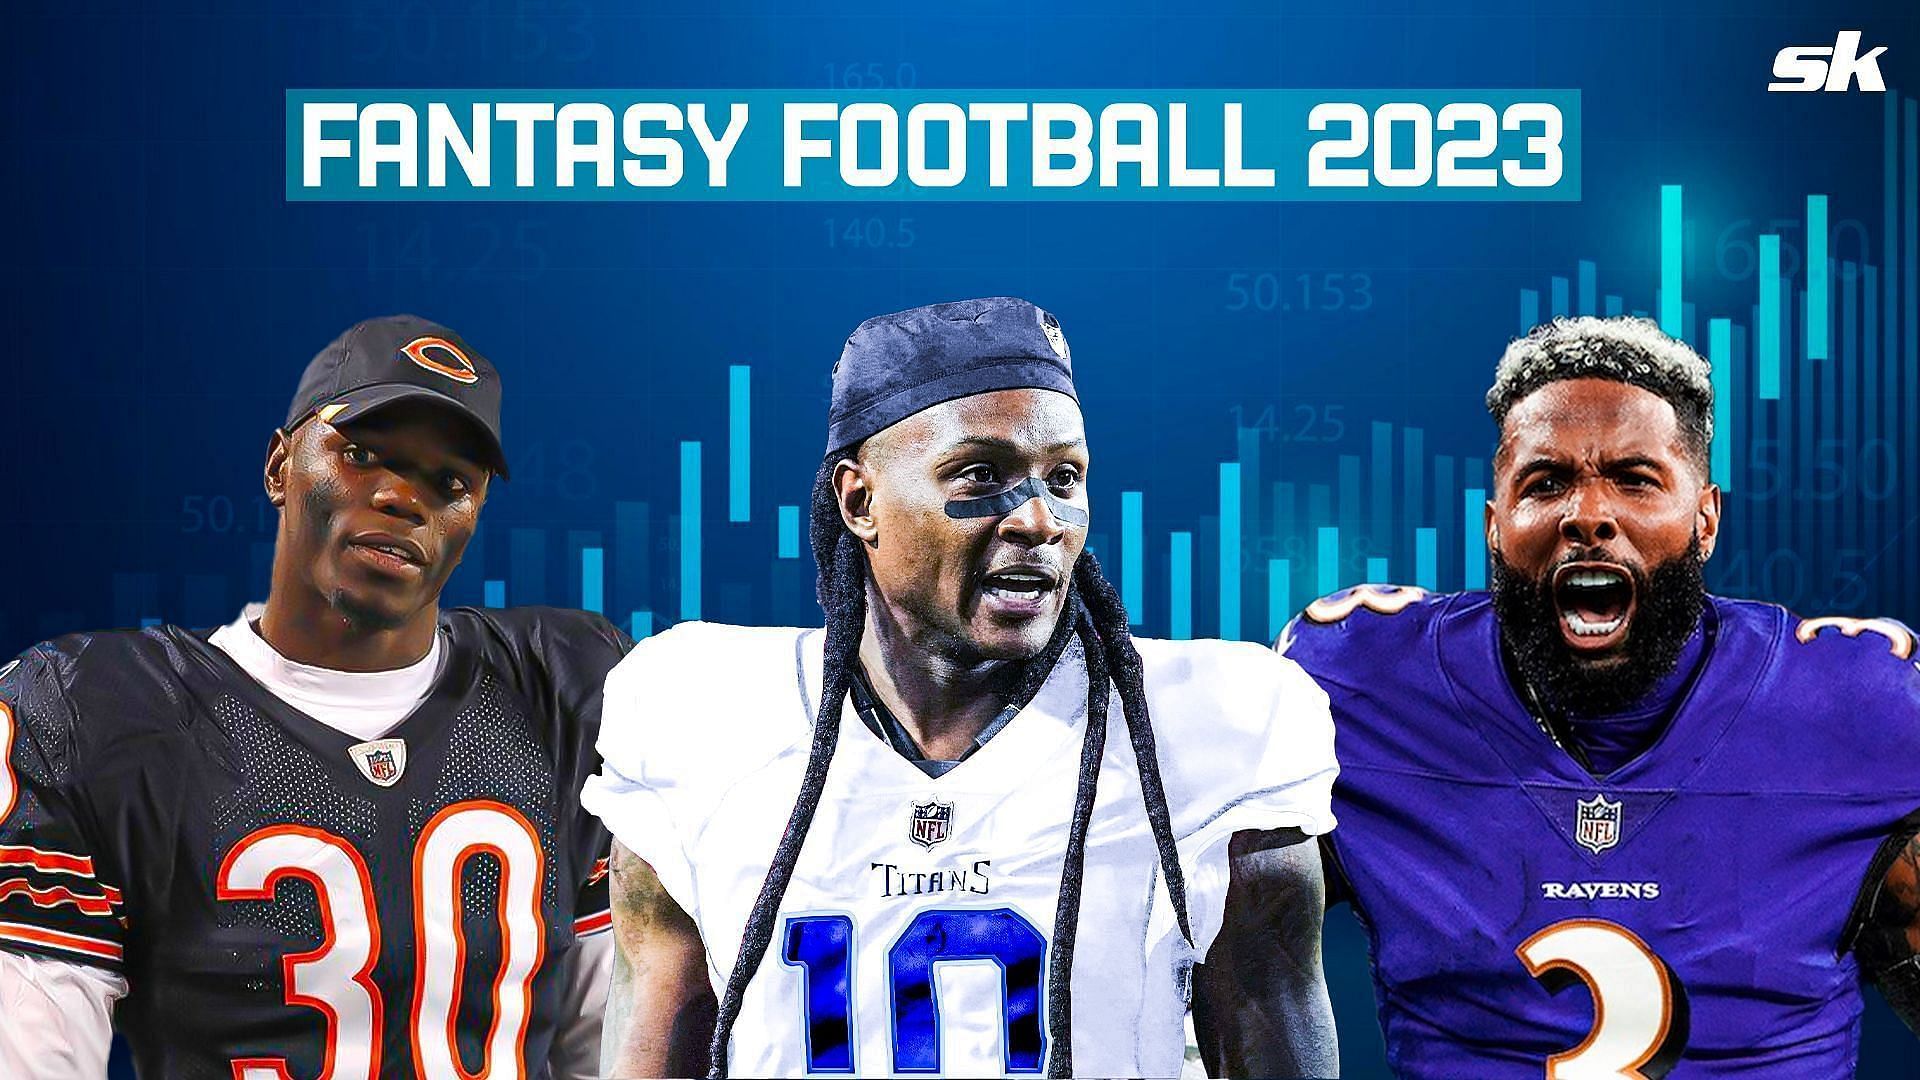 525+ Funny Fantasy Football Team Names (Updated 2023)